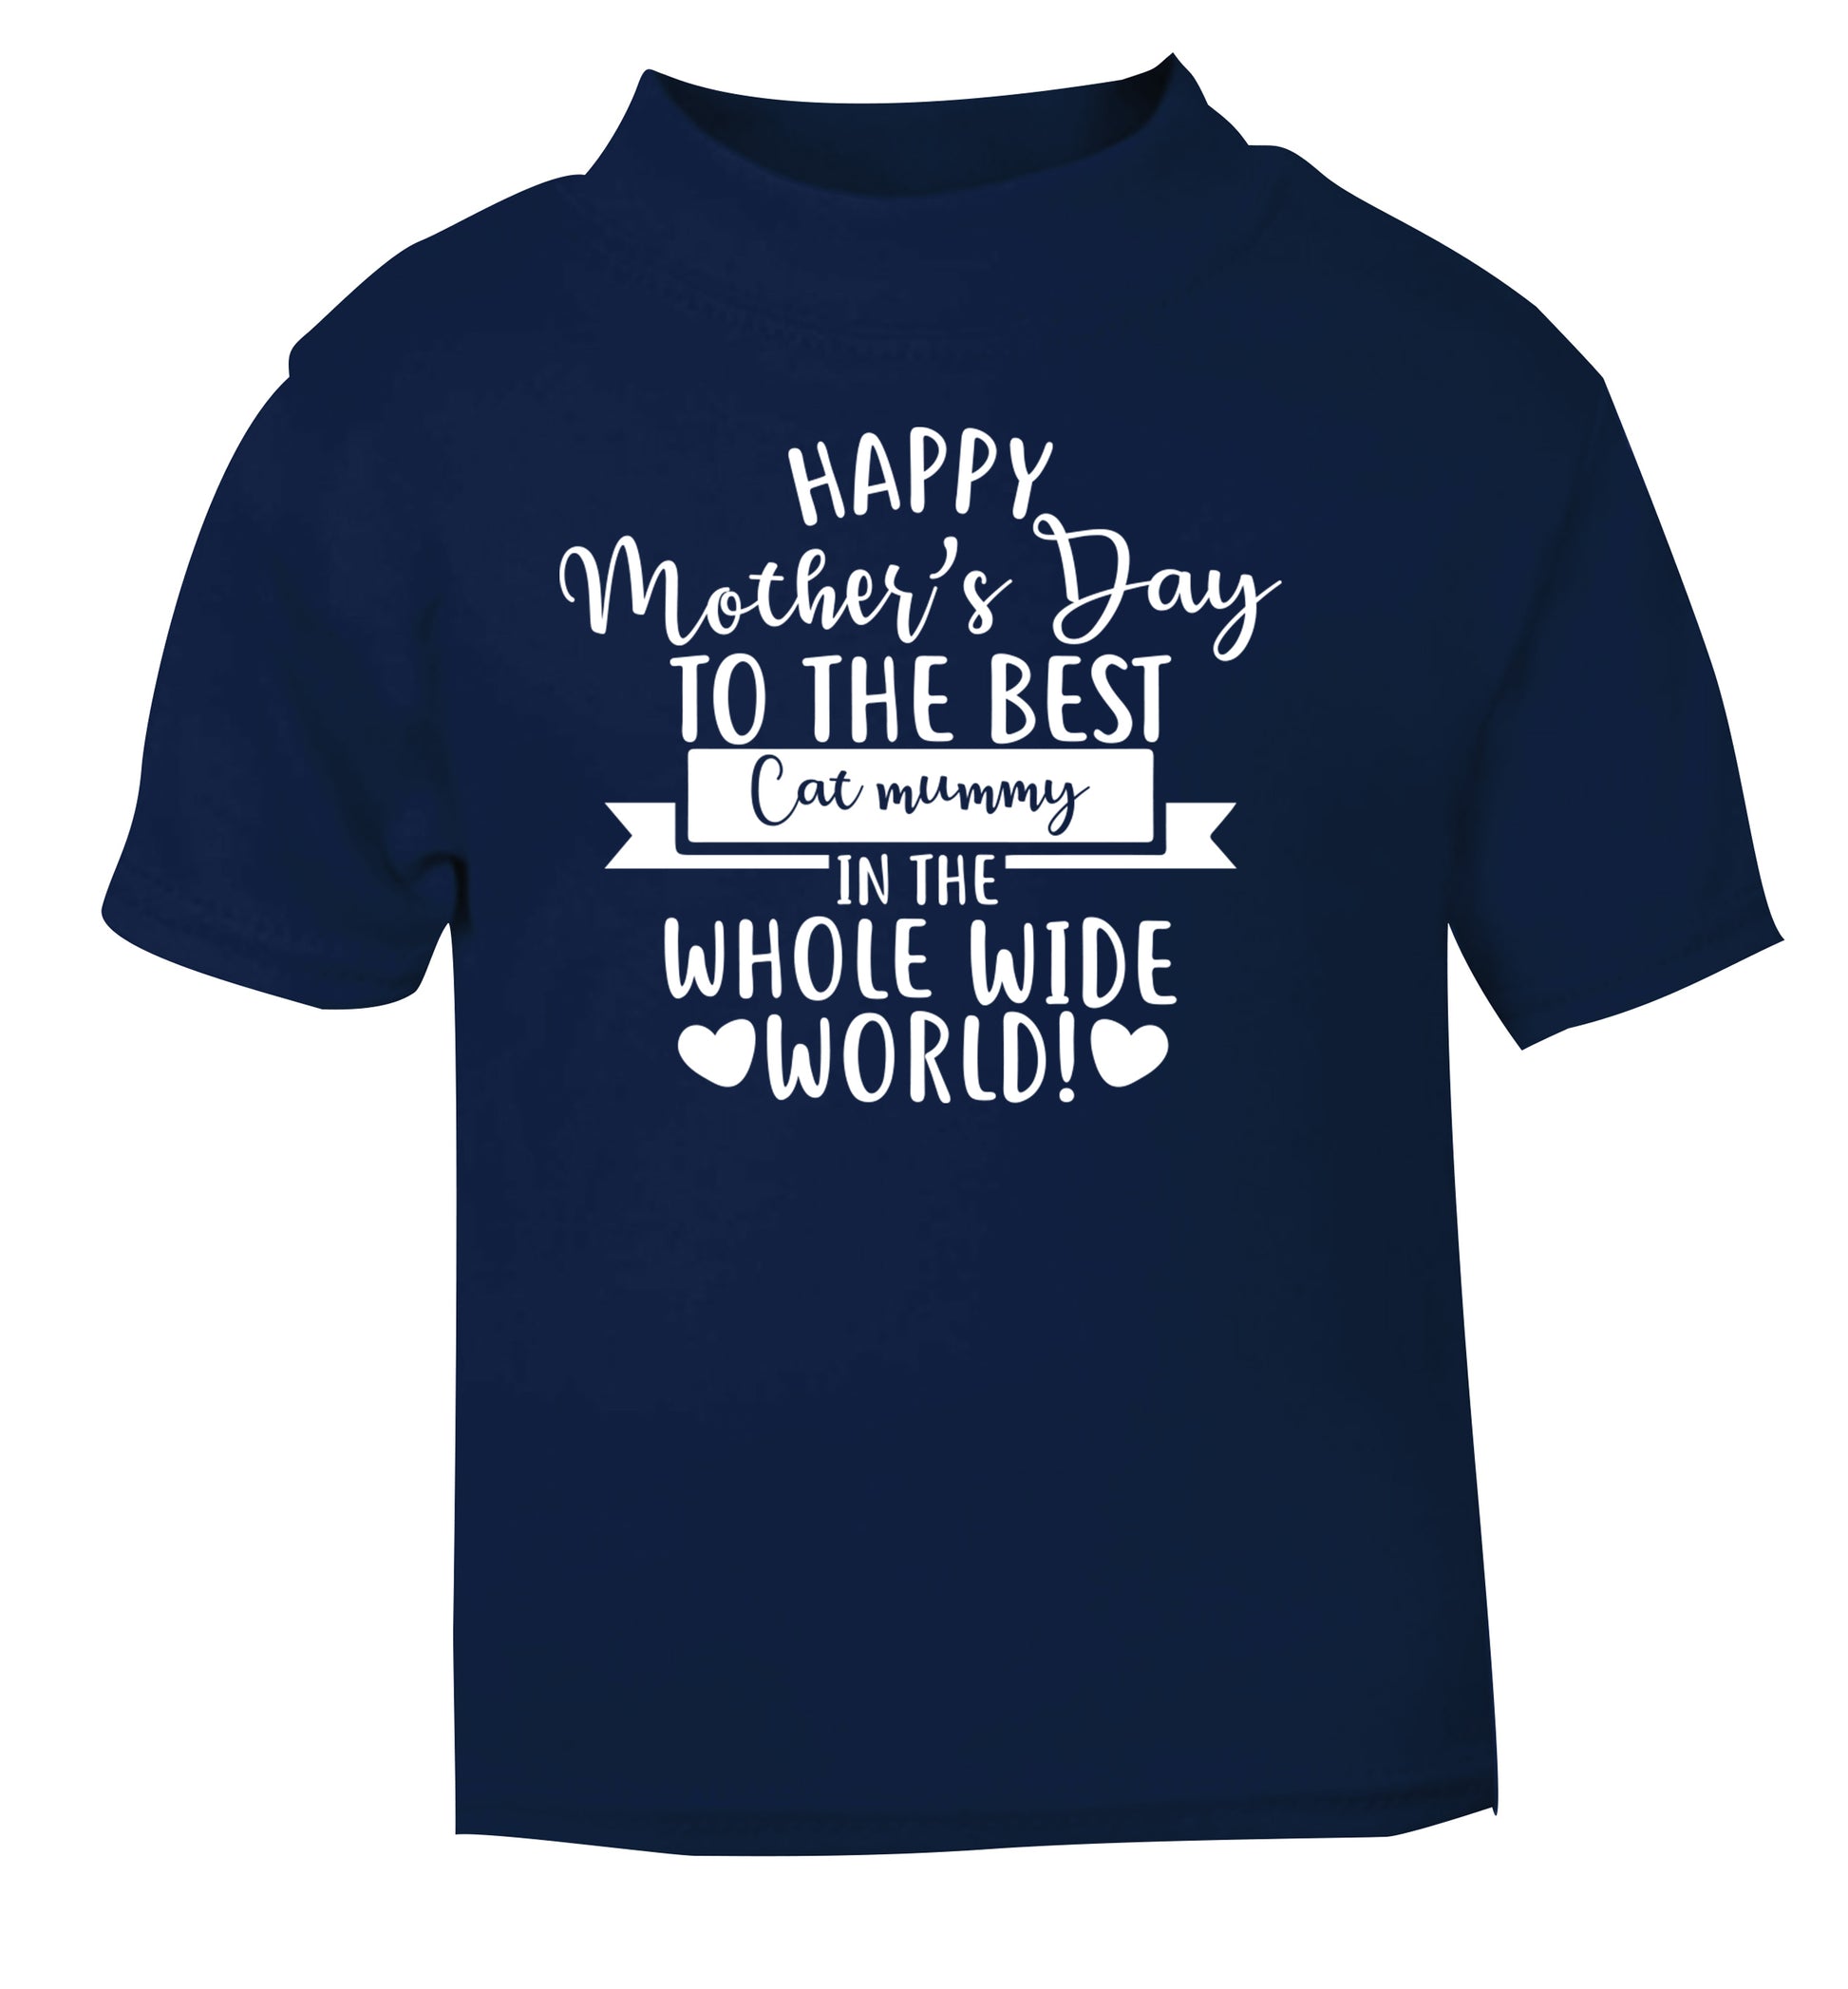 Happy mother's day to the best cat mummy in the world navy Baby Toddler Tshirt 2 Years